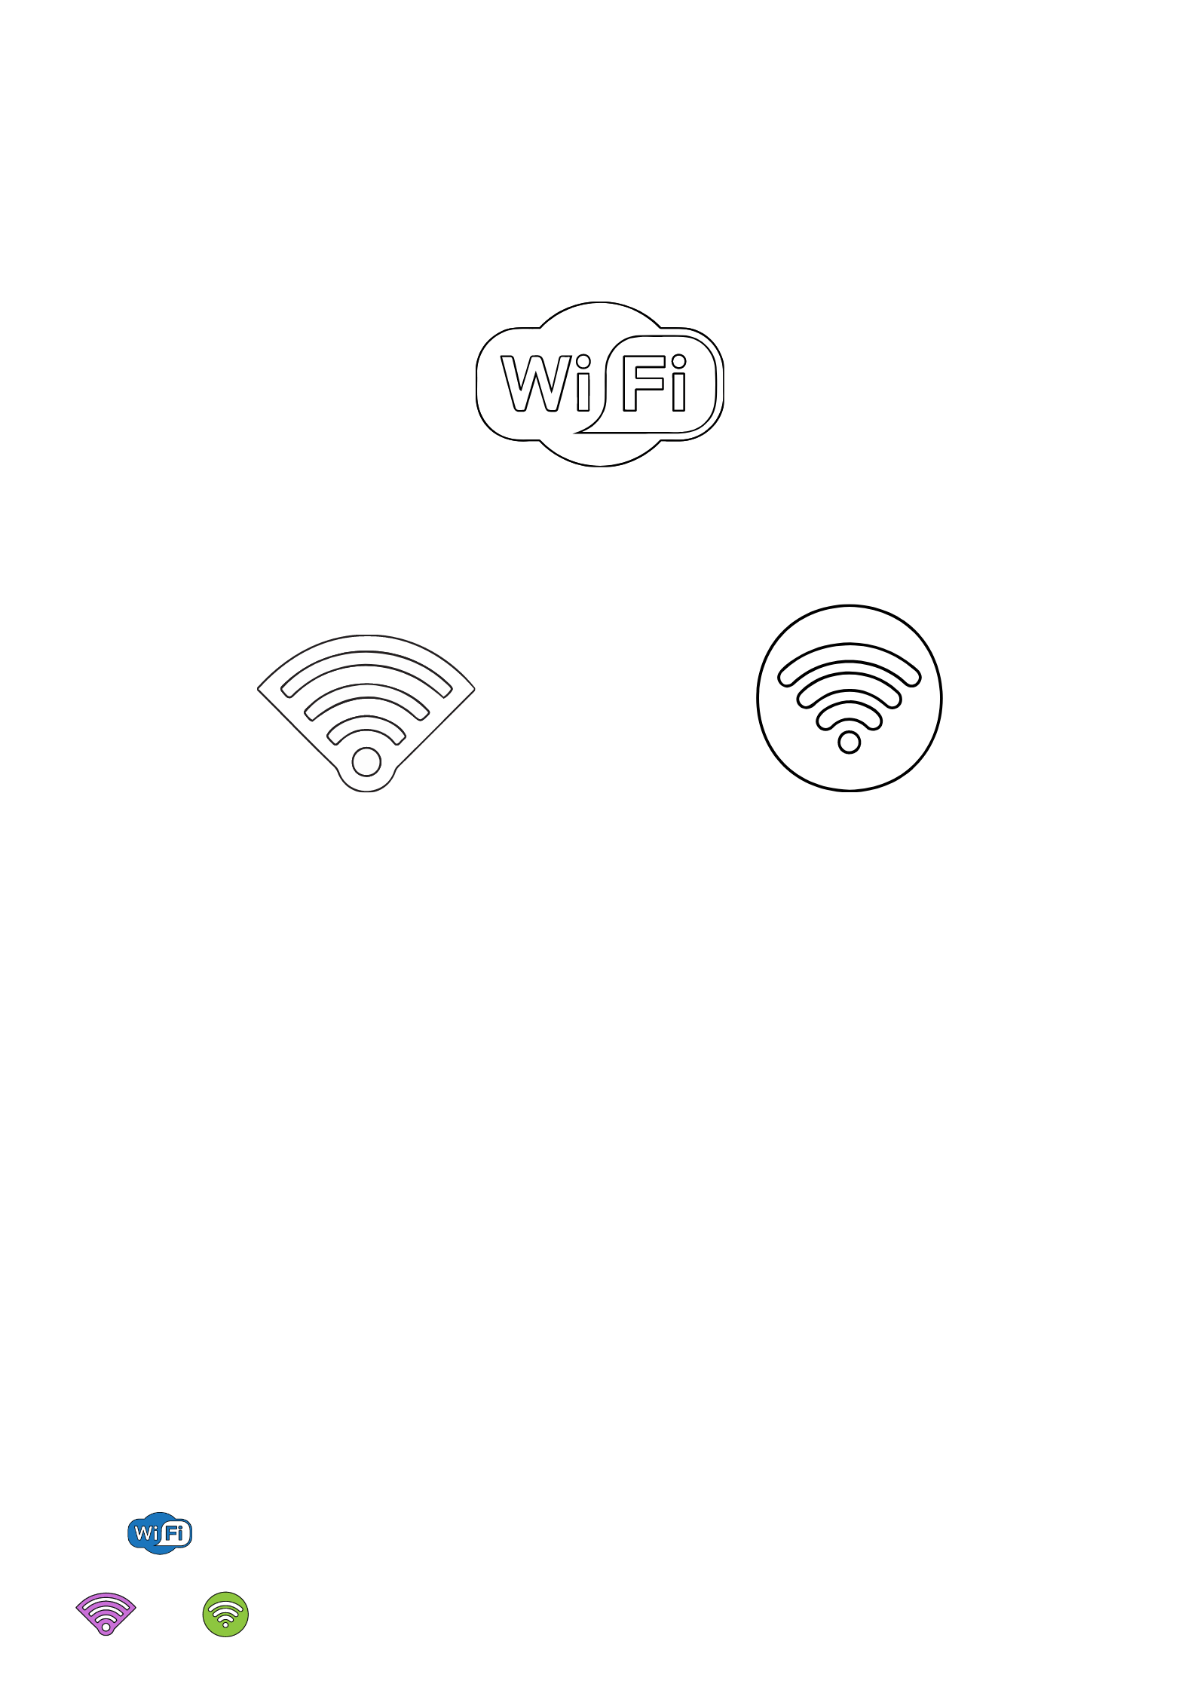 Free Small Wifi Symbol coloring page Template